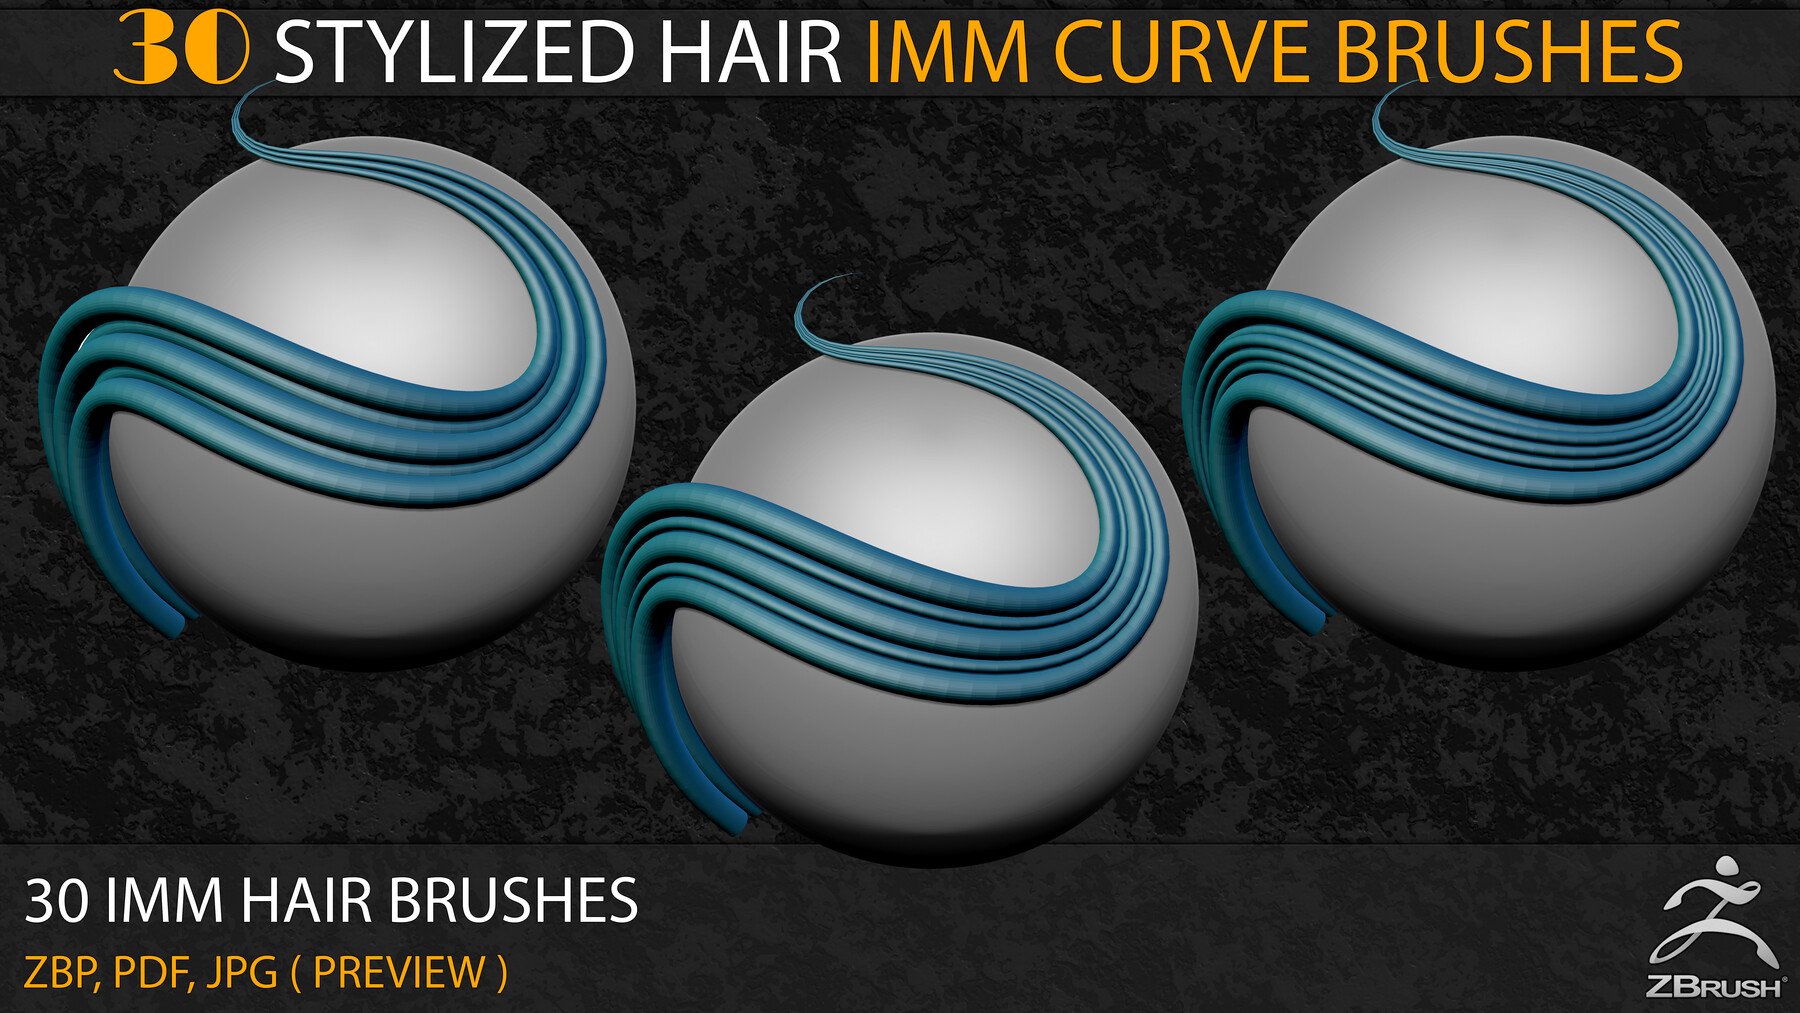 30 Stylized Hair IMM Curve Brushes Vol.3